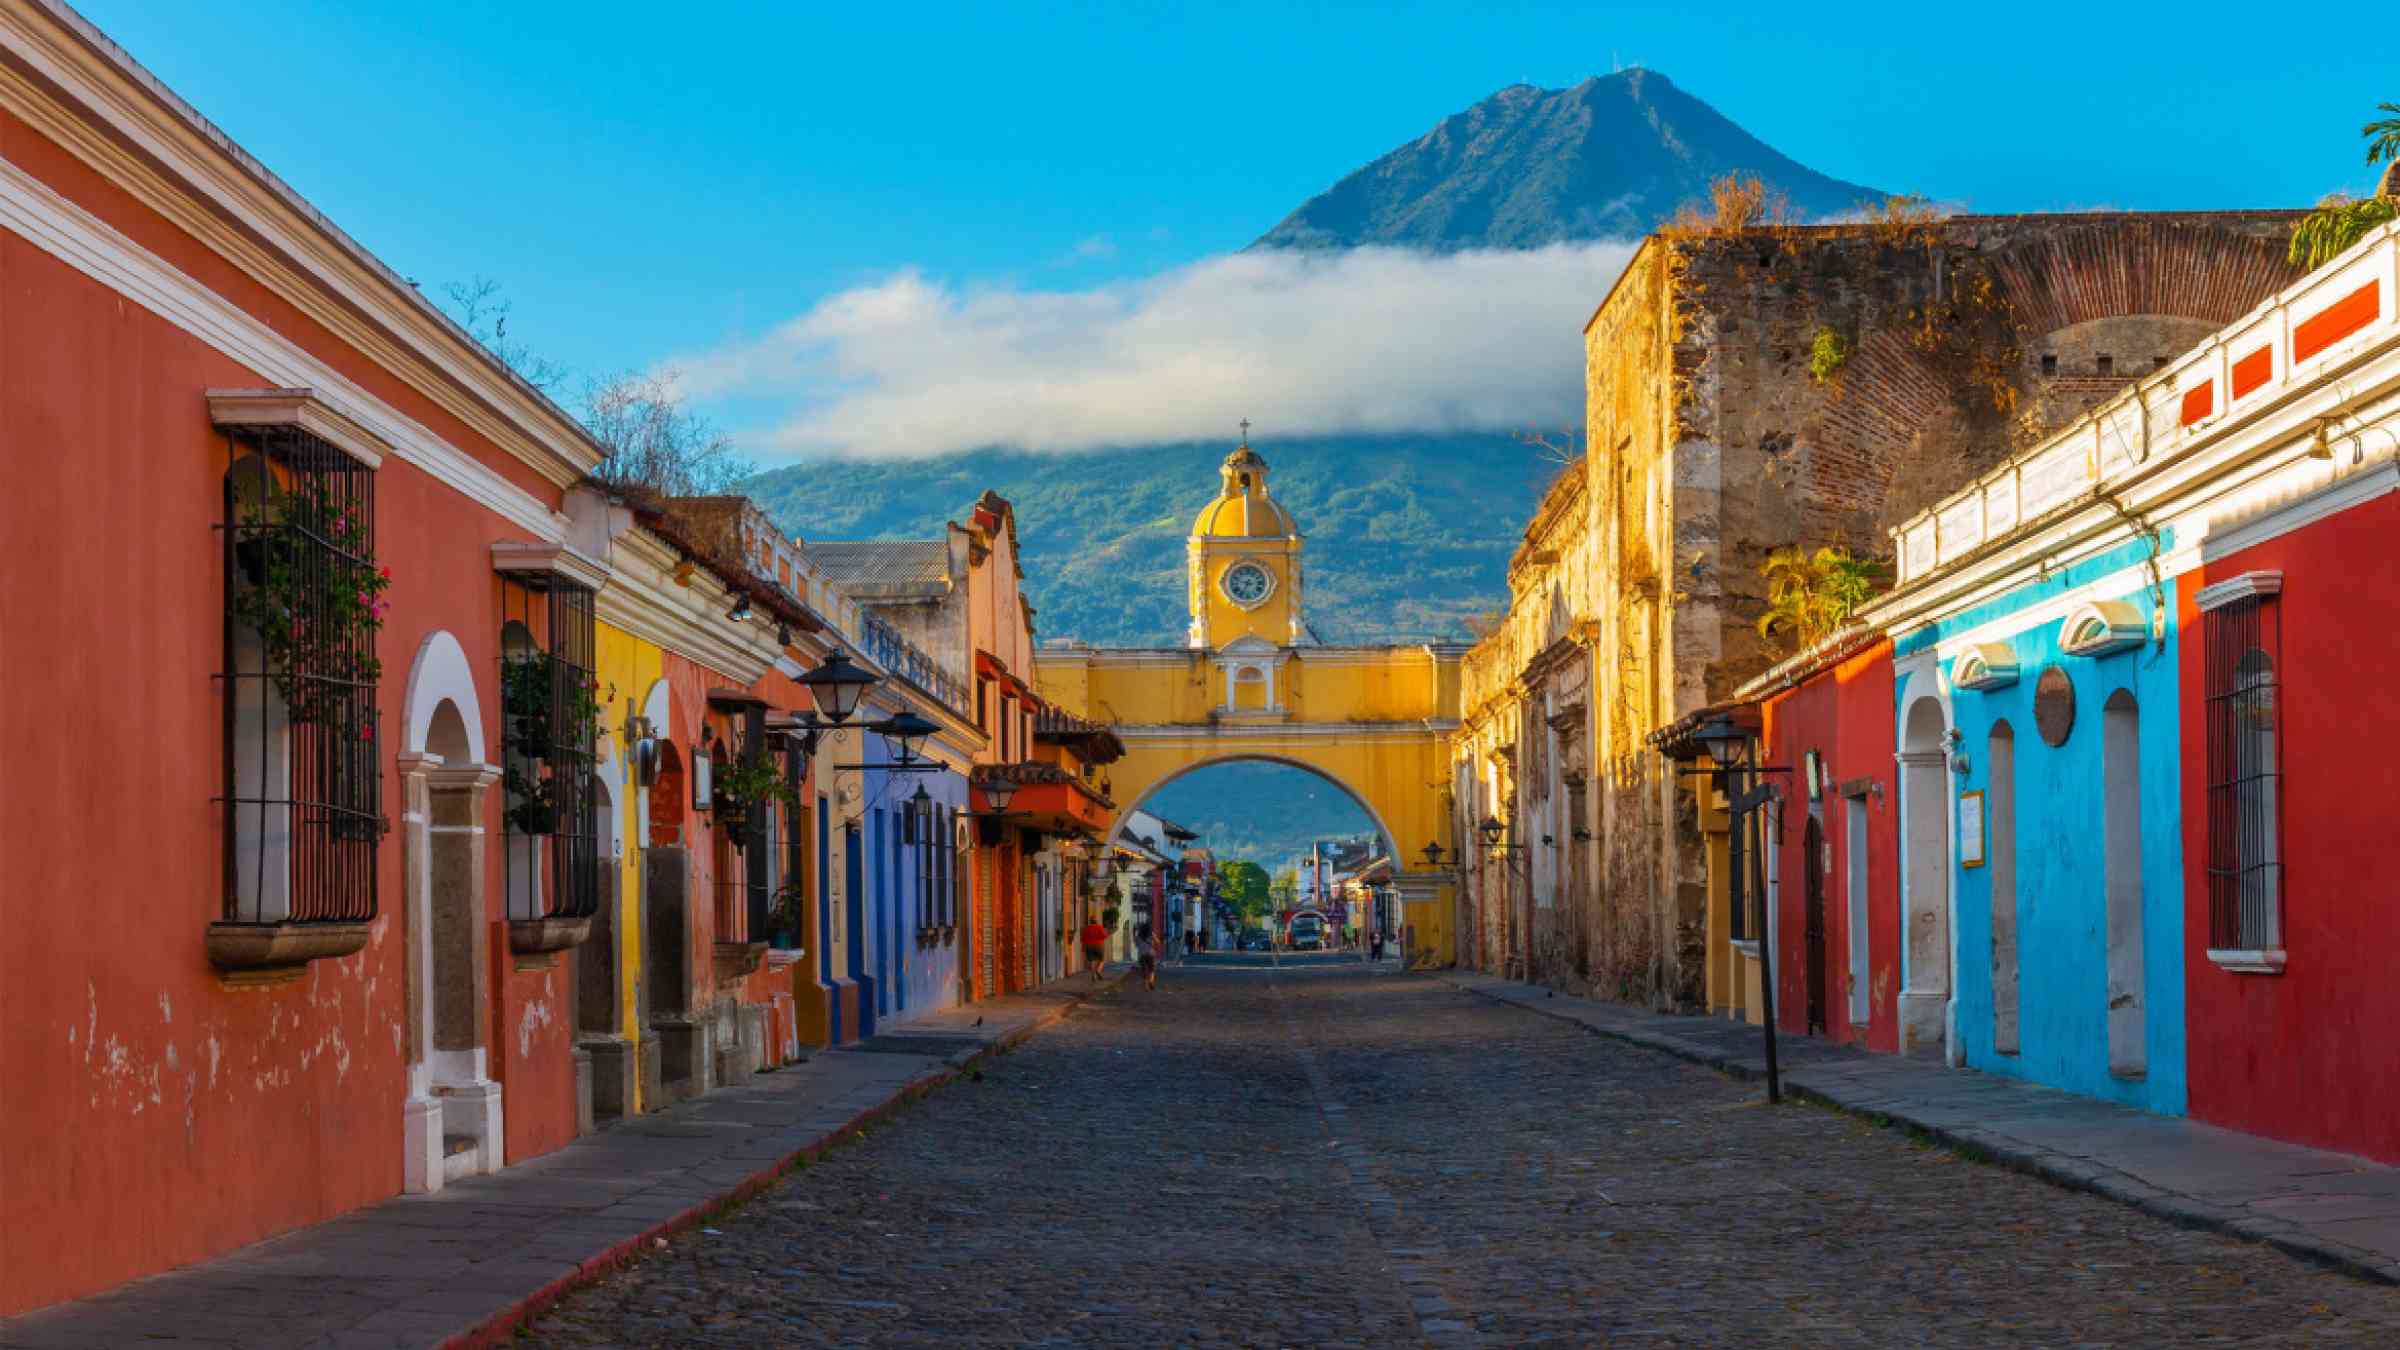 View of the volcano in the background of the city of Antigua Guatemala, Guatemala